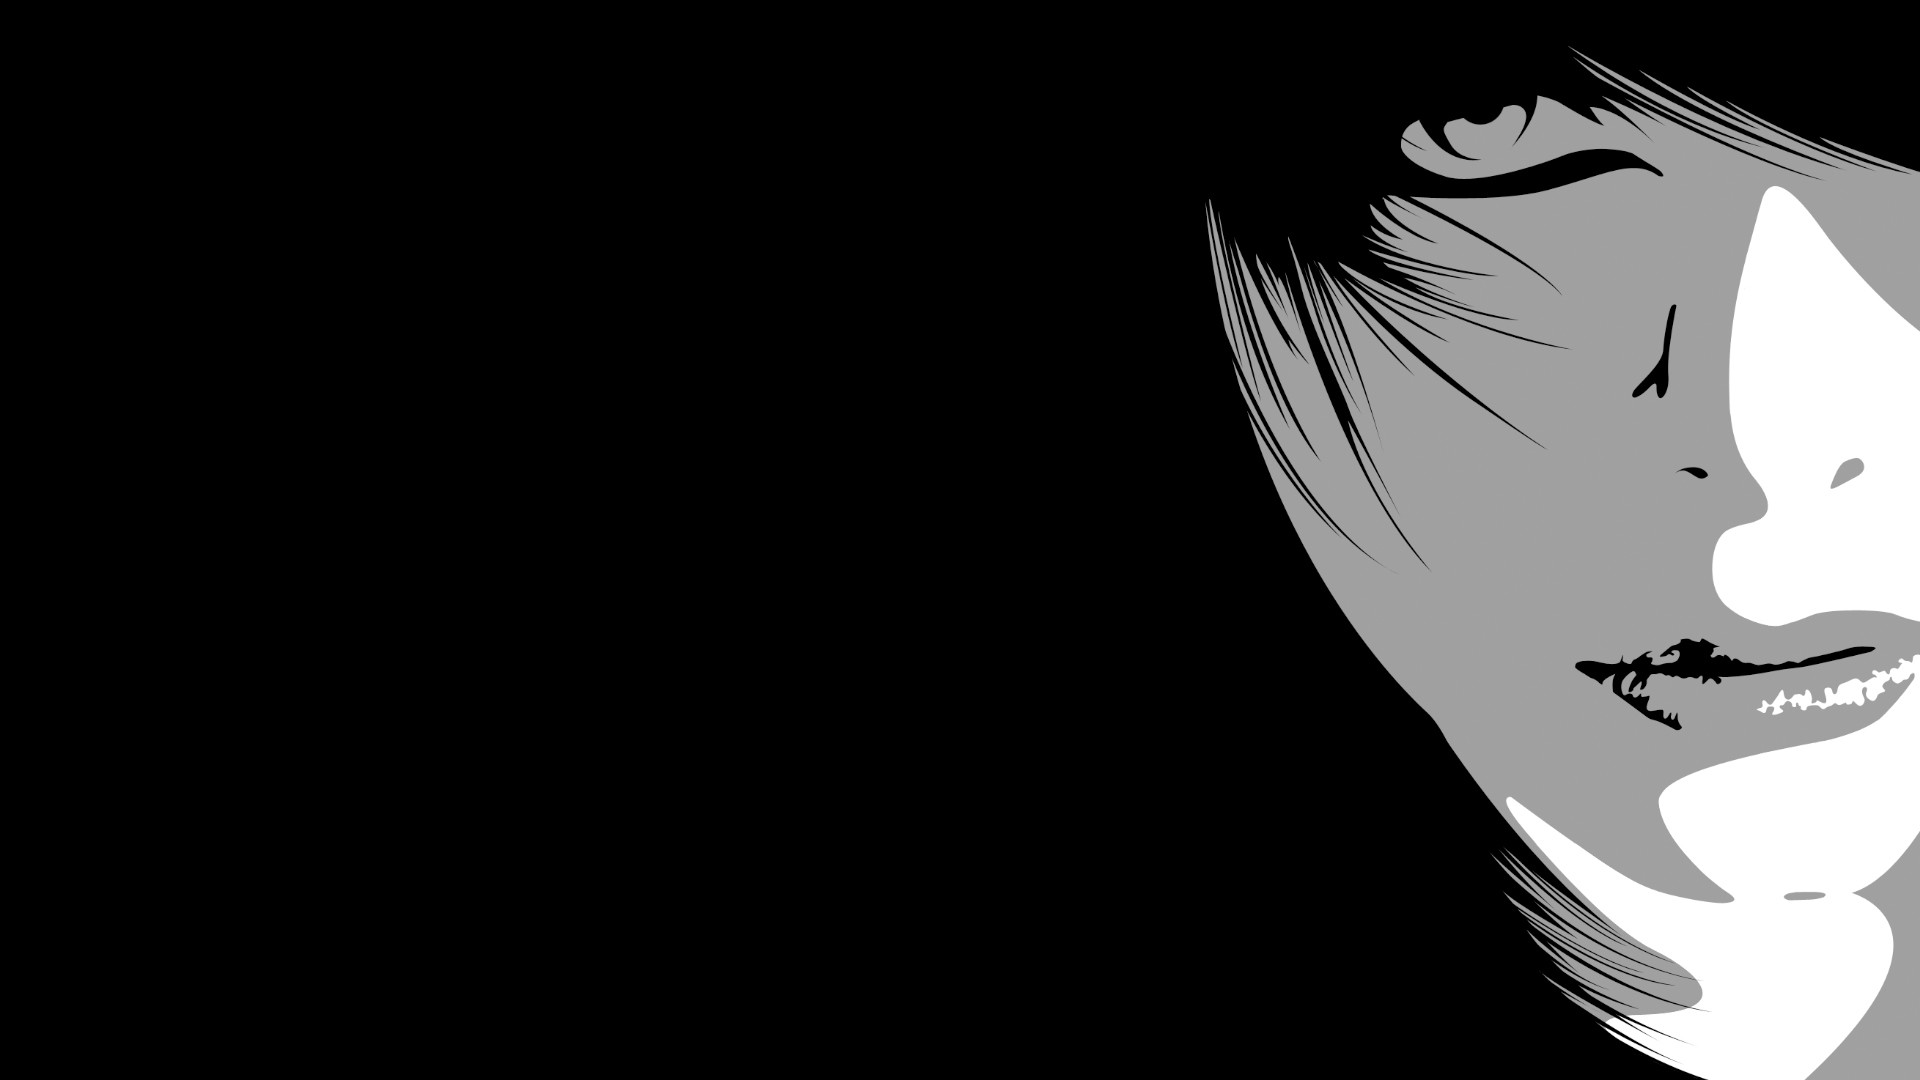 1920x1080 emo wallpapers for laptop Emo Wallpapers for Laptop